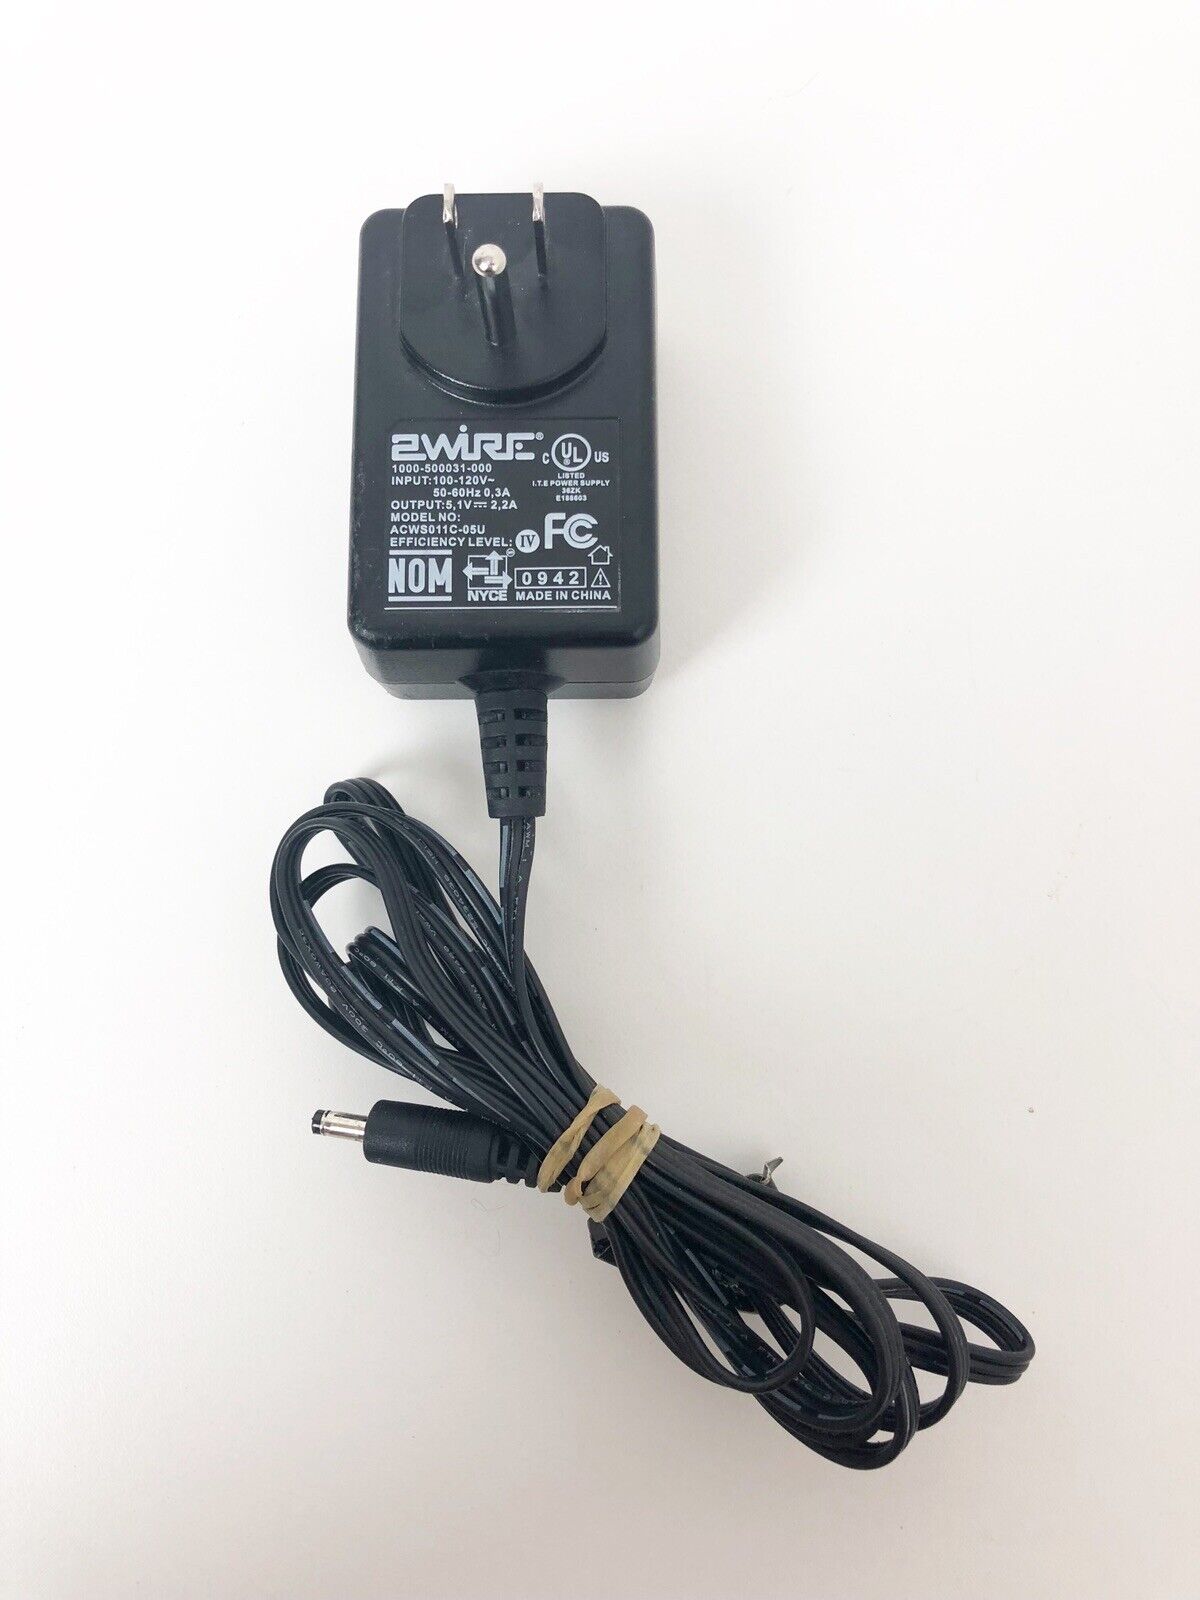 2WIRE AC Adapter ACWS011C-05U Modem Power Supply Wall Plug Type: Plug Brand: 2Wire Features: Powered MPN: 1000-50